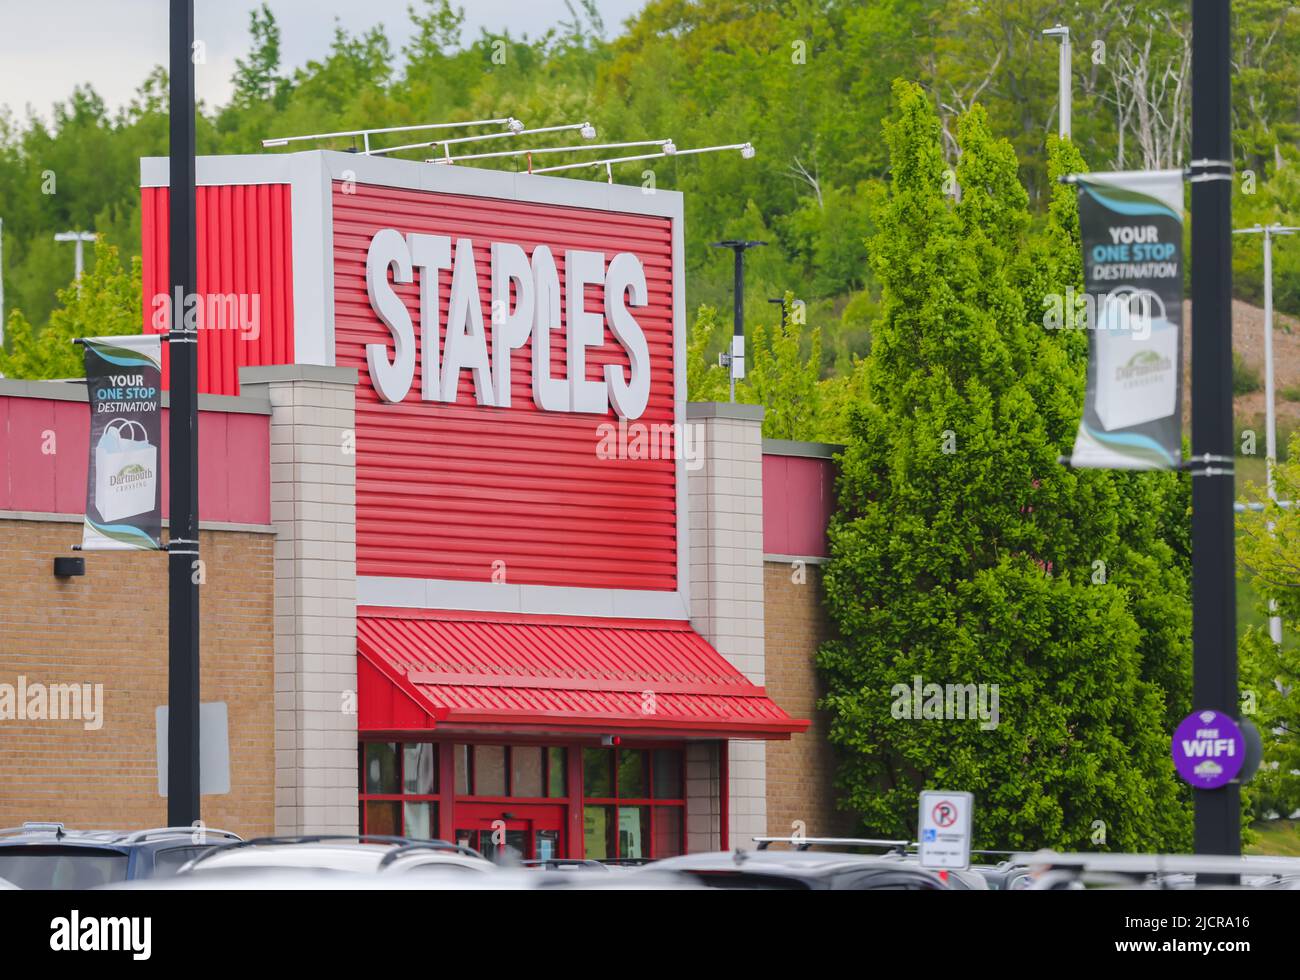 Staples Storefront. Staples is an American office retail company specialized in office supplies. HALIFAX, NOVA SCOTIA, CANADA - JUNE 2022 Stock Photo